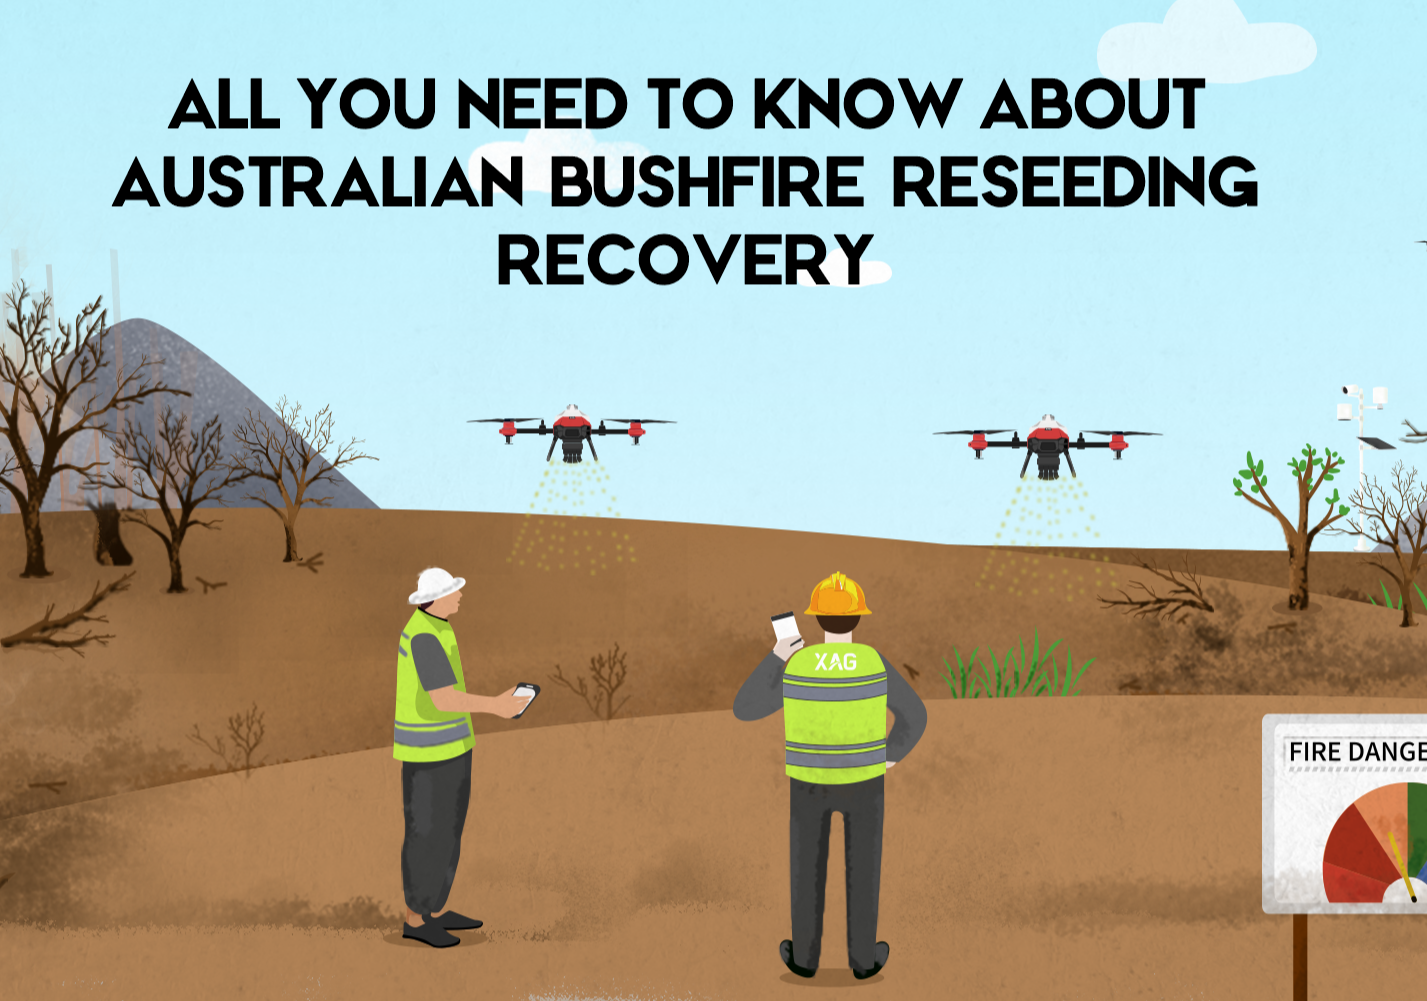 How to regrow vegetation after a wildfire in Australia?